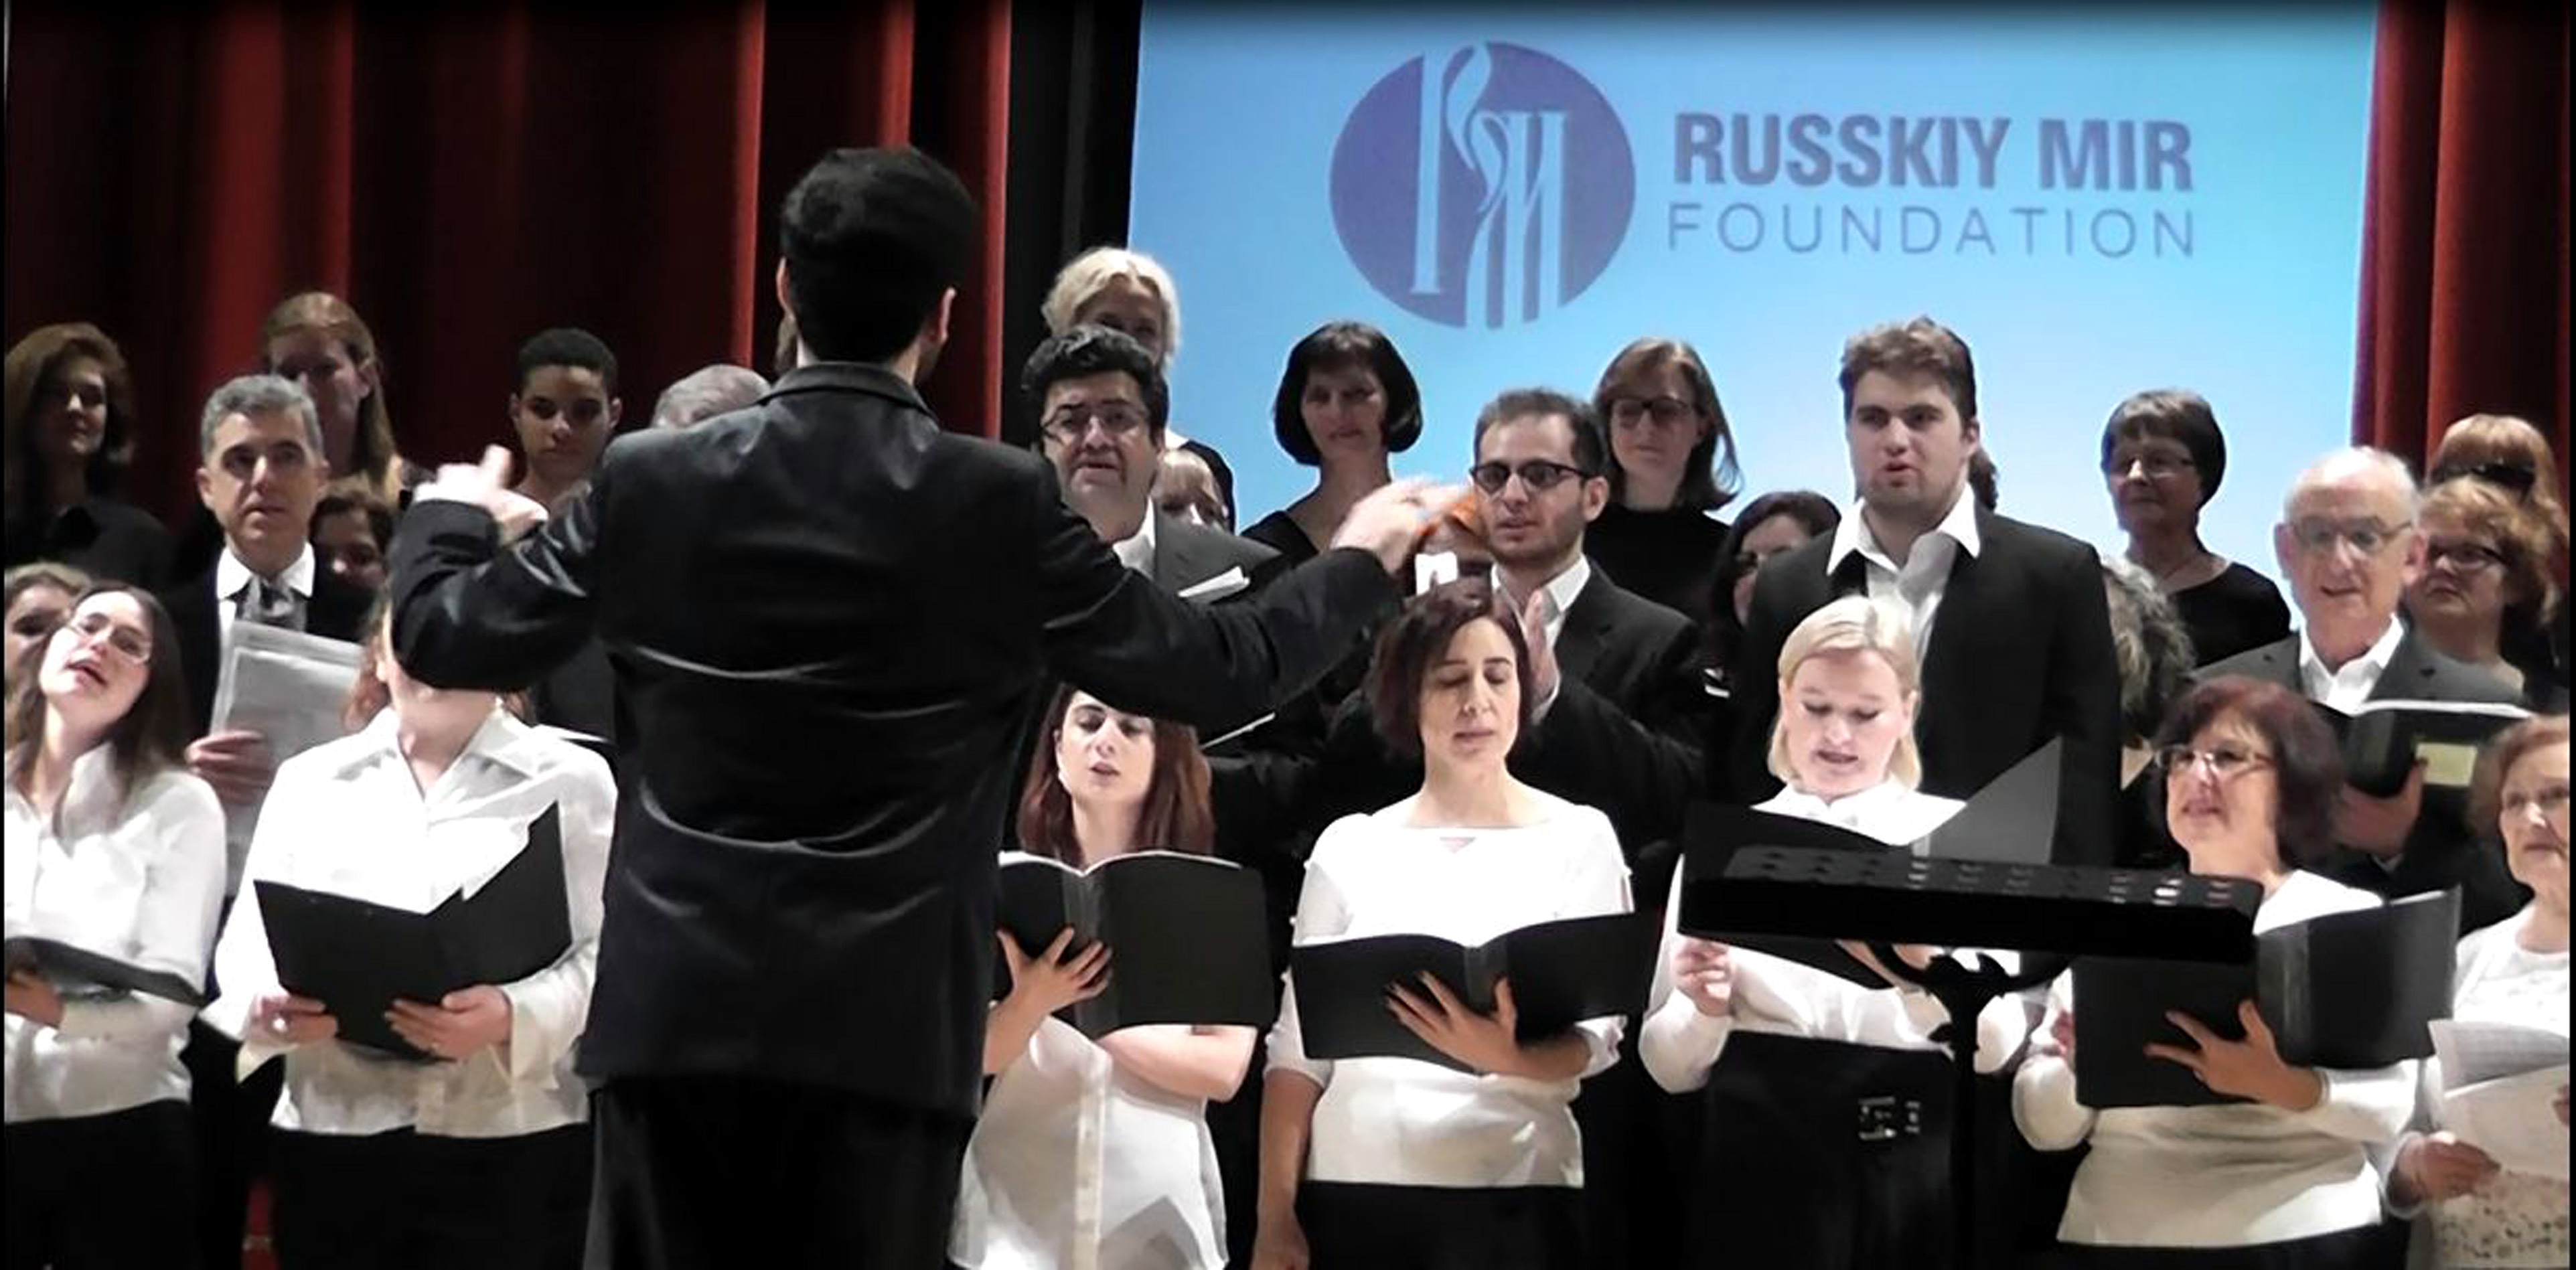 Klingen Choir in Maslenitsa Celebration Concert with UK Russian choirs at St John's Smith Square, We